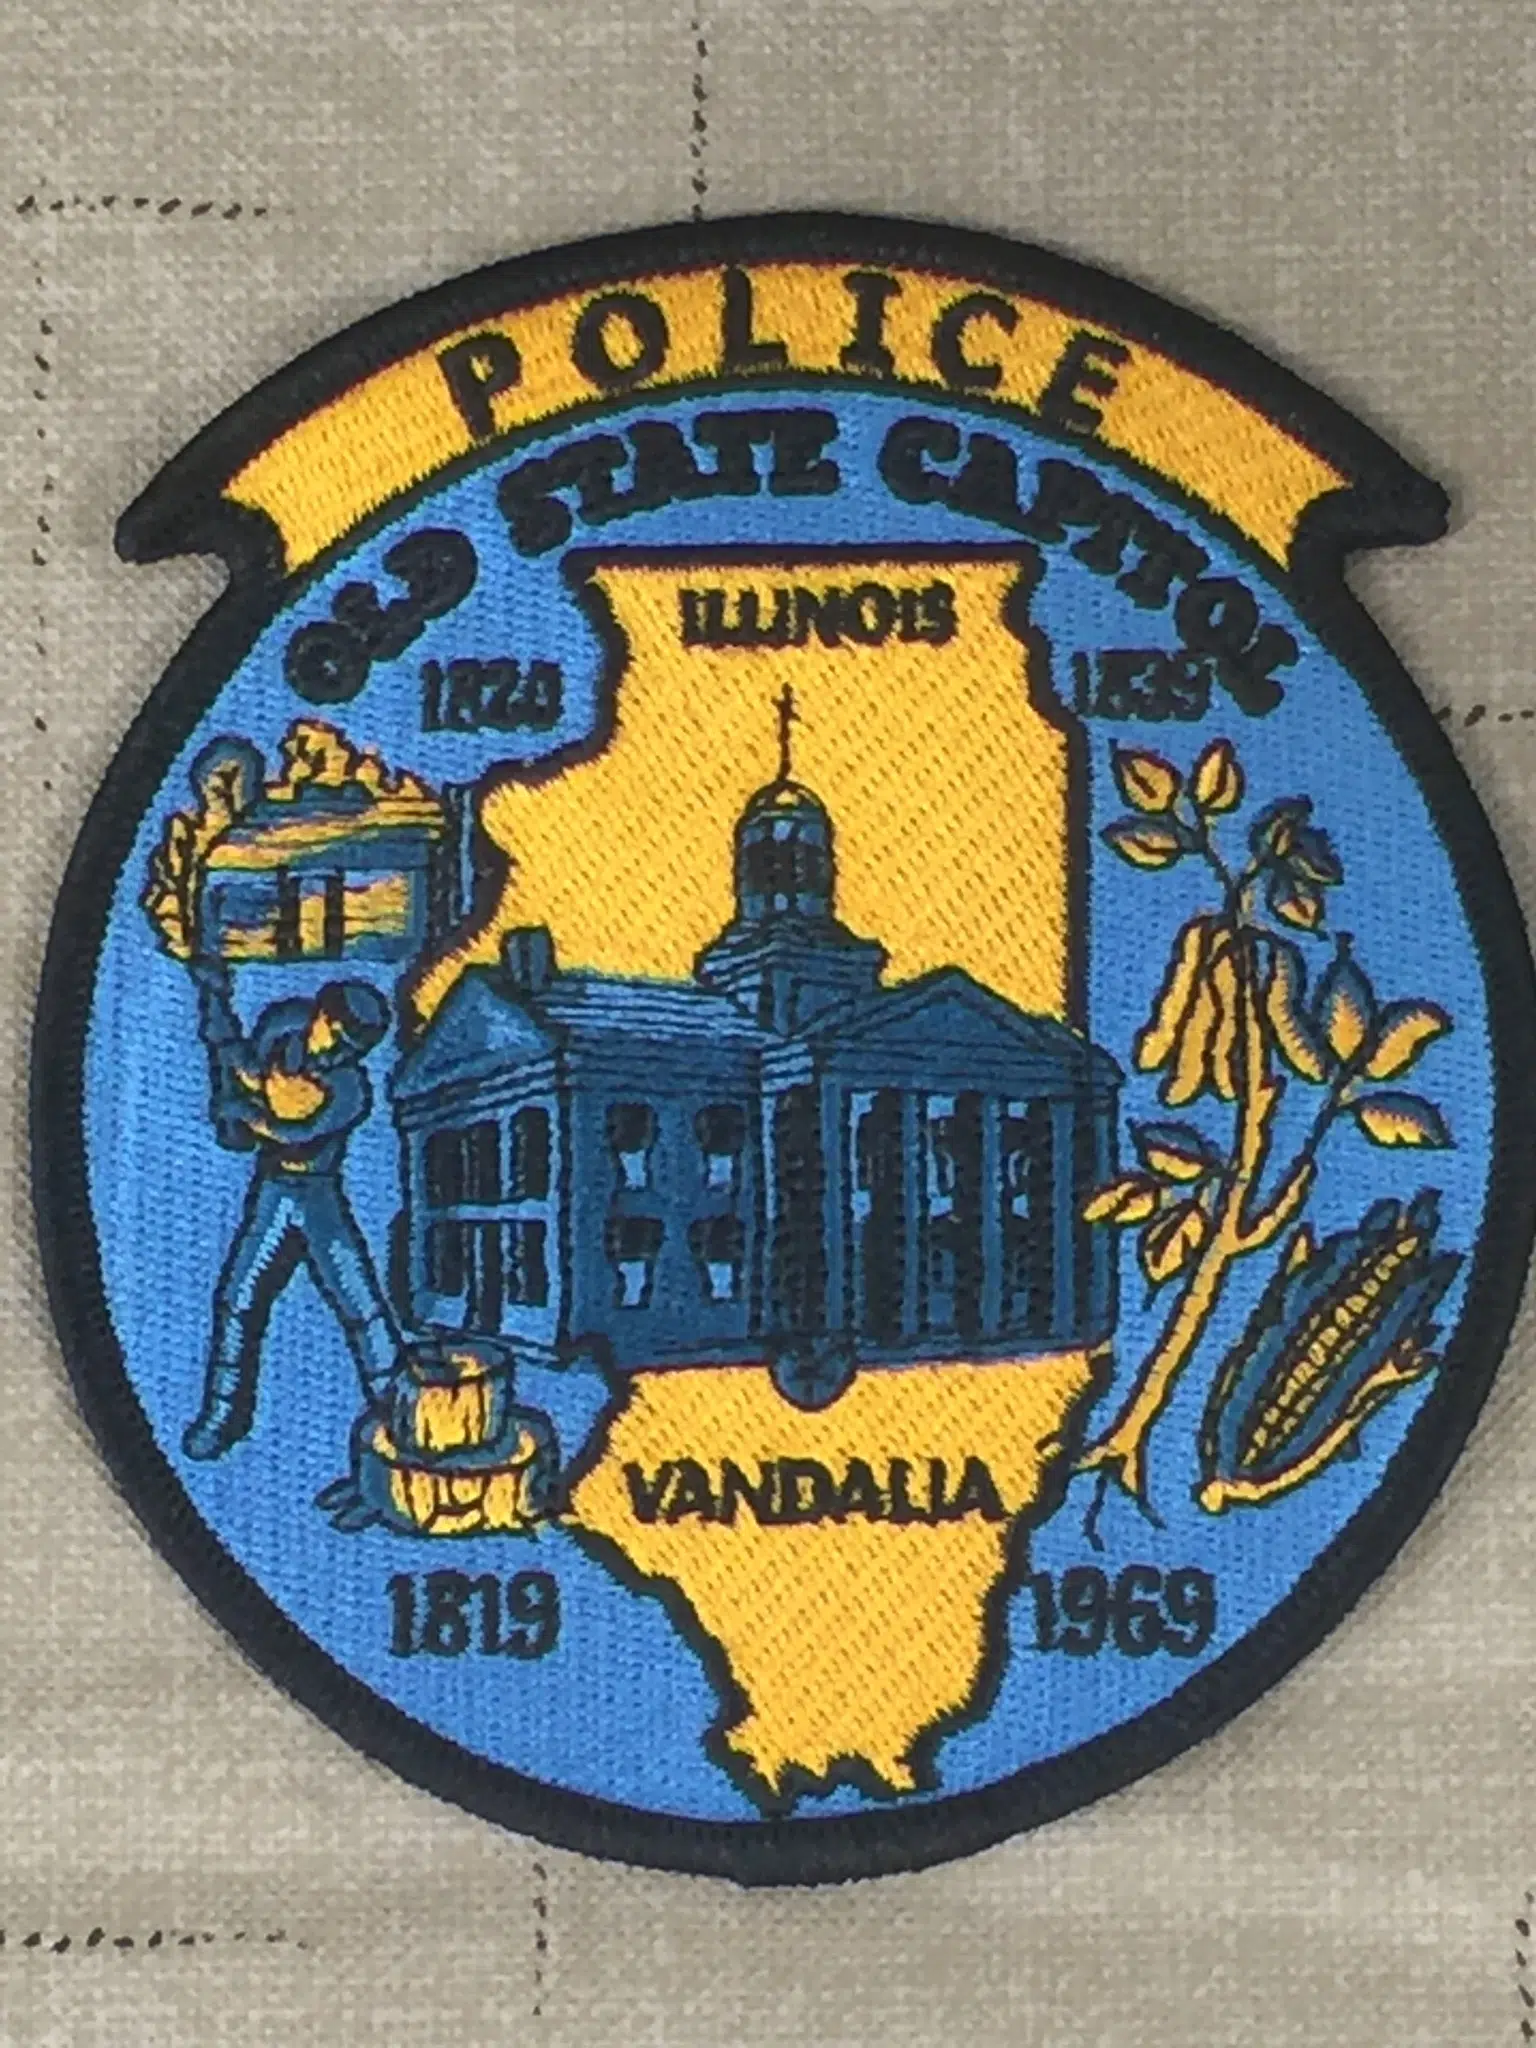 Vandalia PD reports---Individual arrested on pending charge of theft 